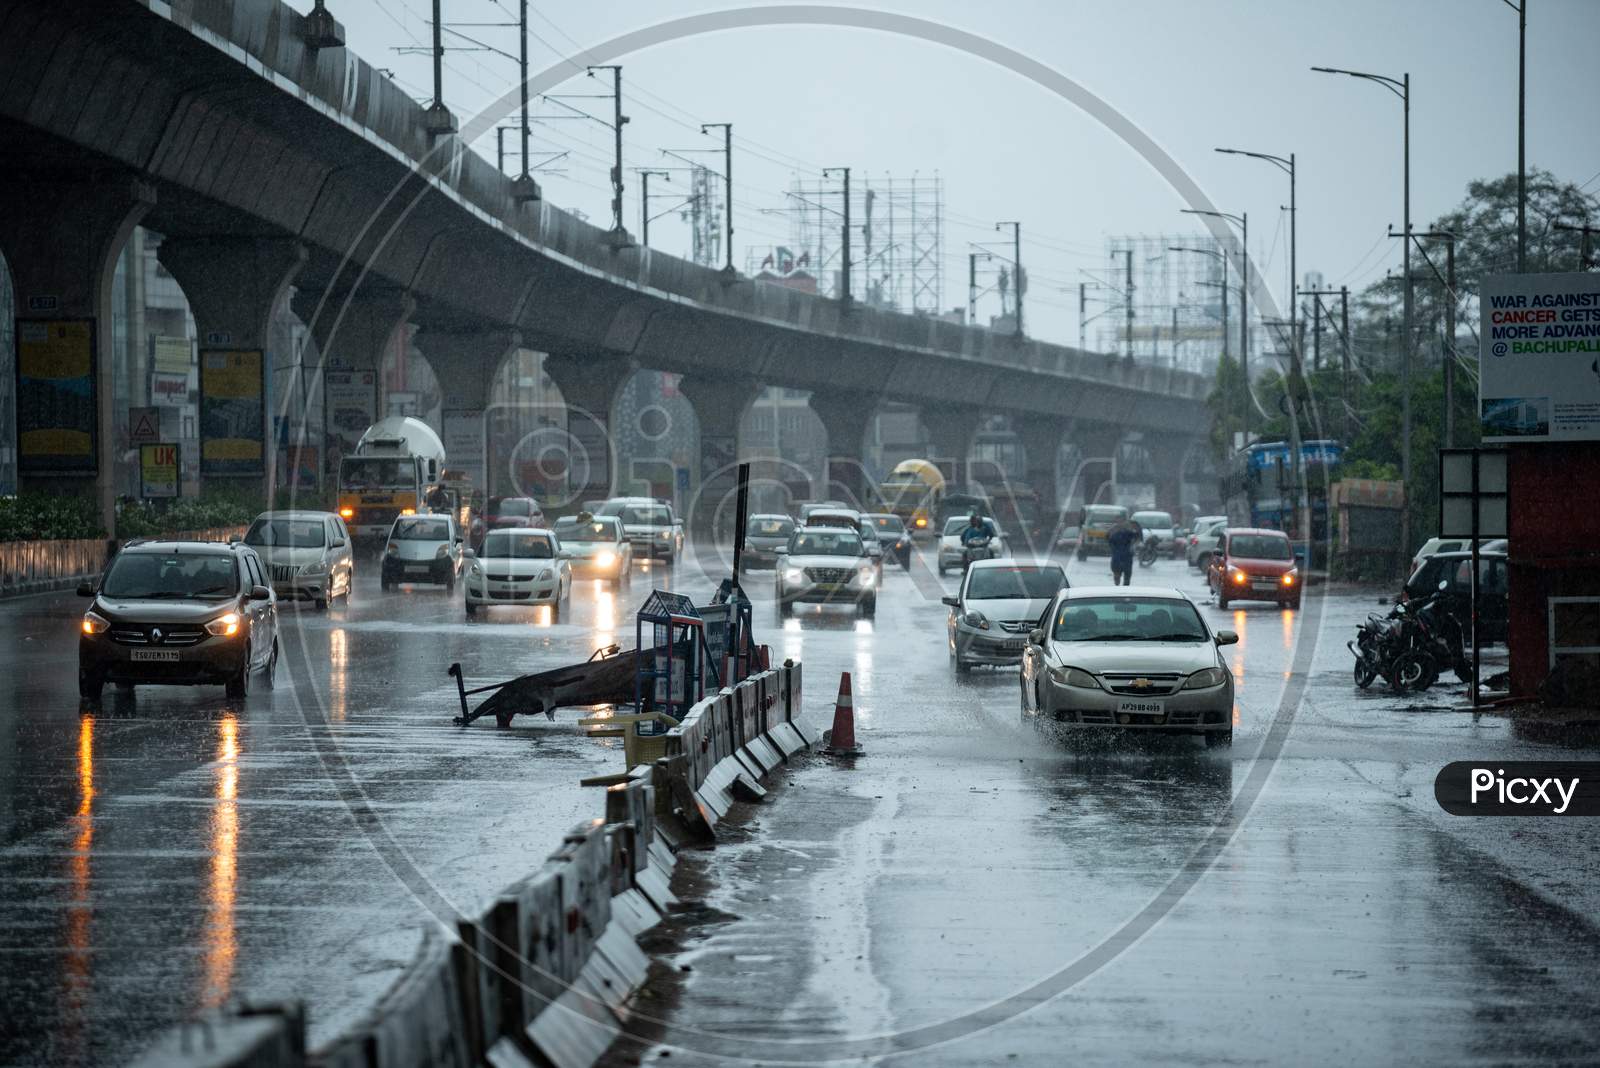 Vehicles ply as Heavy rains and gusty winds lash several parts of the city as the government eases lockdown restrictions amid coronavirus pandemic, May 31, 2020, KPHb,Hyderabad.